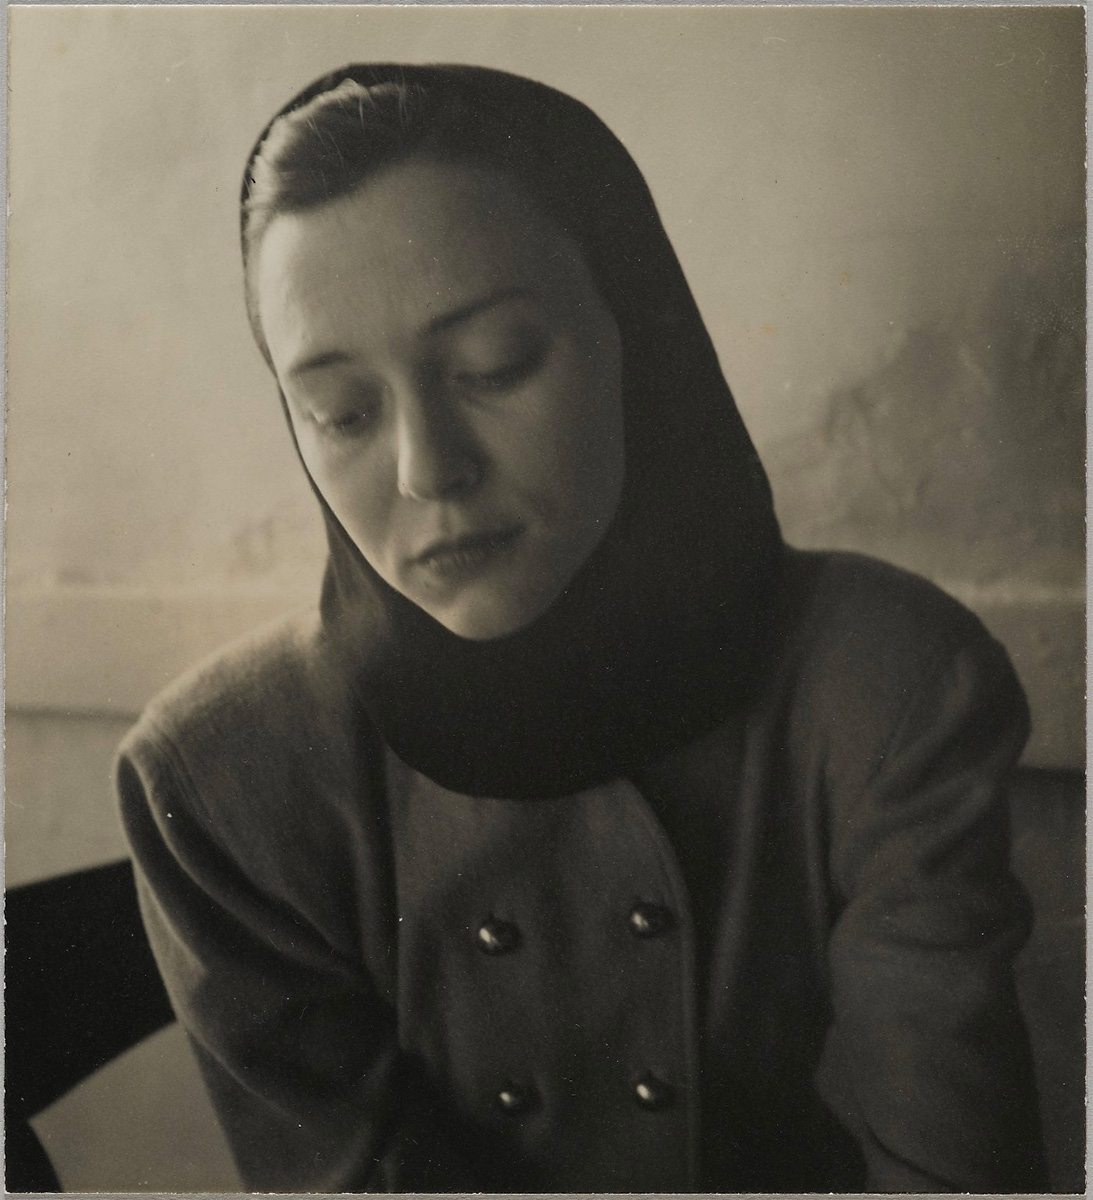 Untitled (Woman in a Hood) - Brooklyn Museum, Gift of Wallace B. Putnam from the estate of Consuelo Kanaga<p>© Consuelo Kanaga</p>